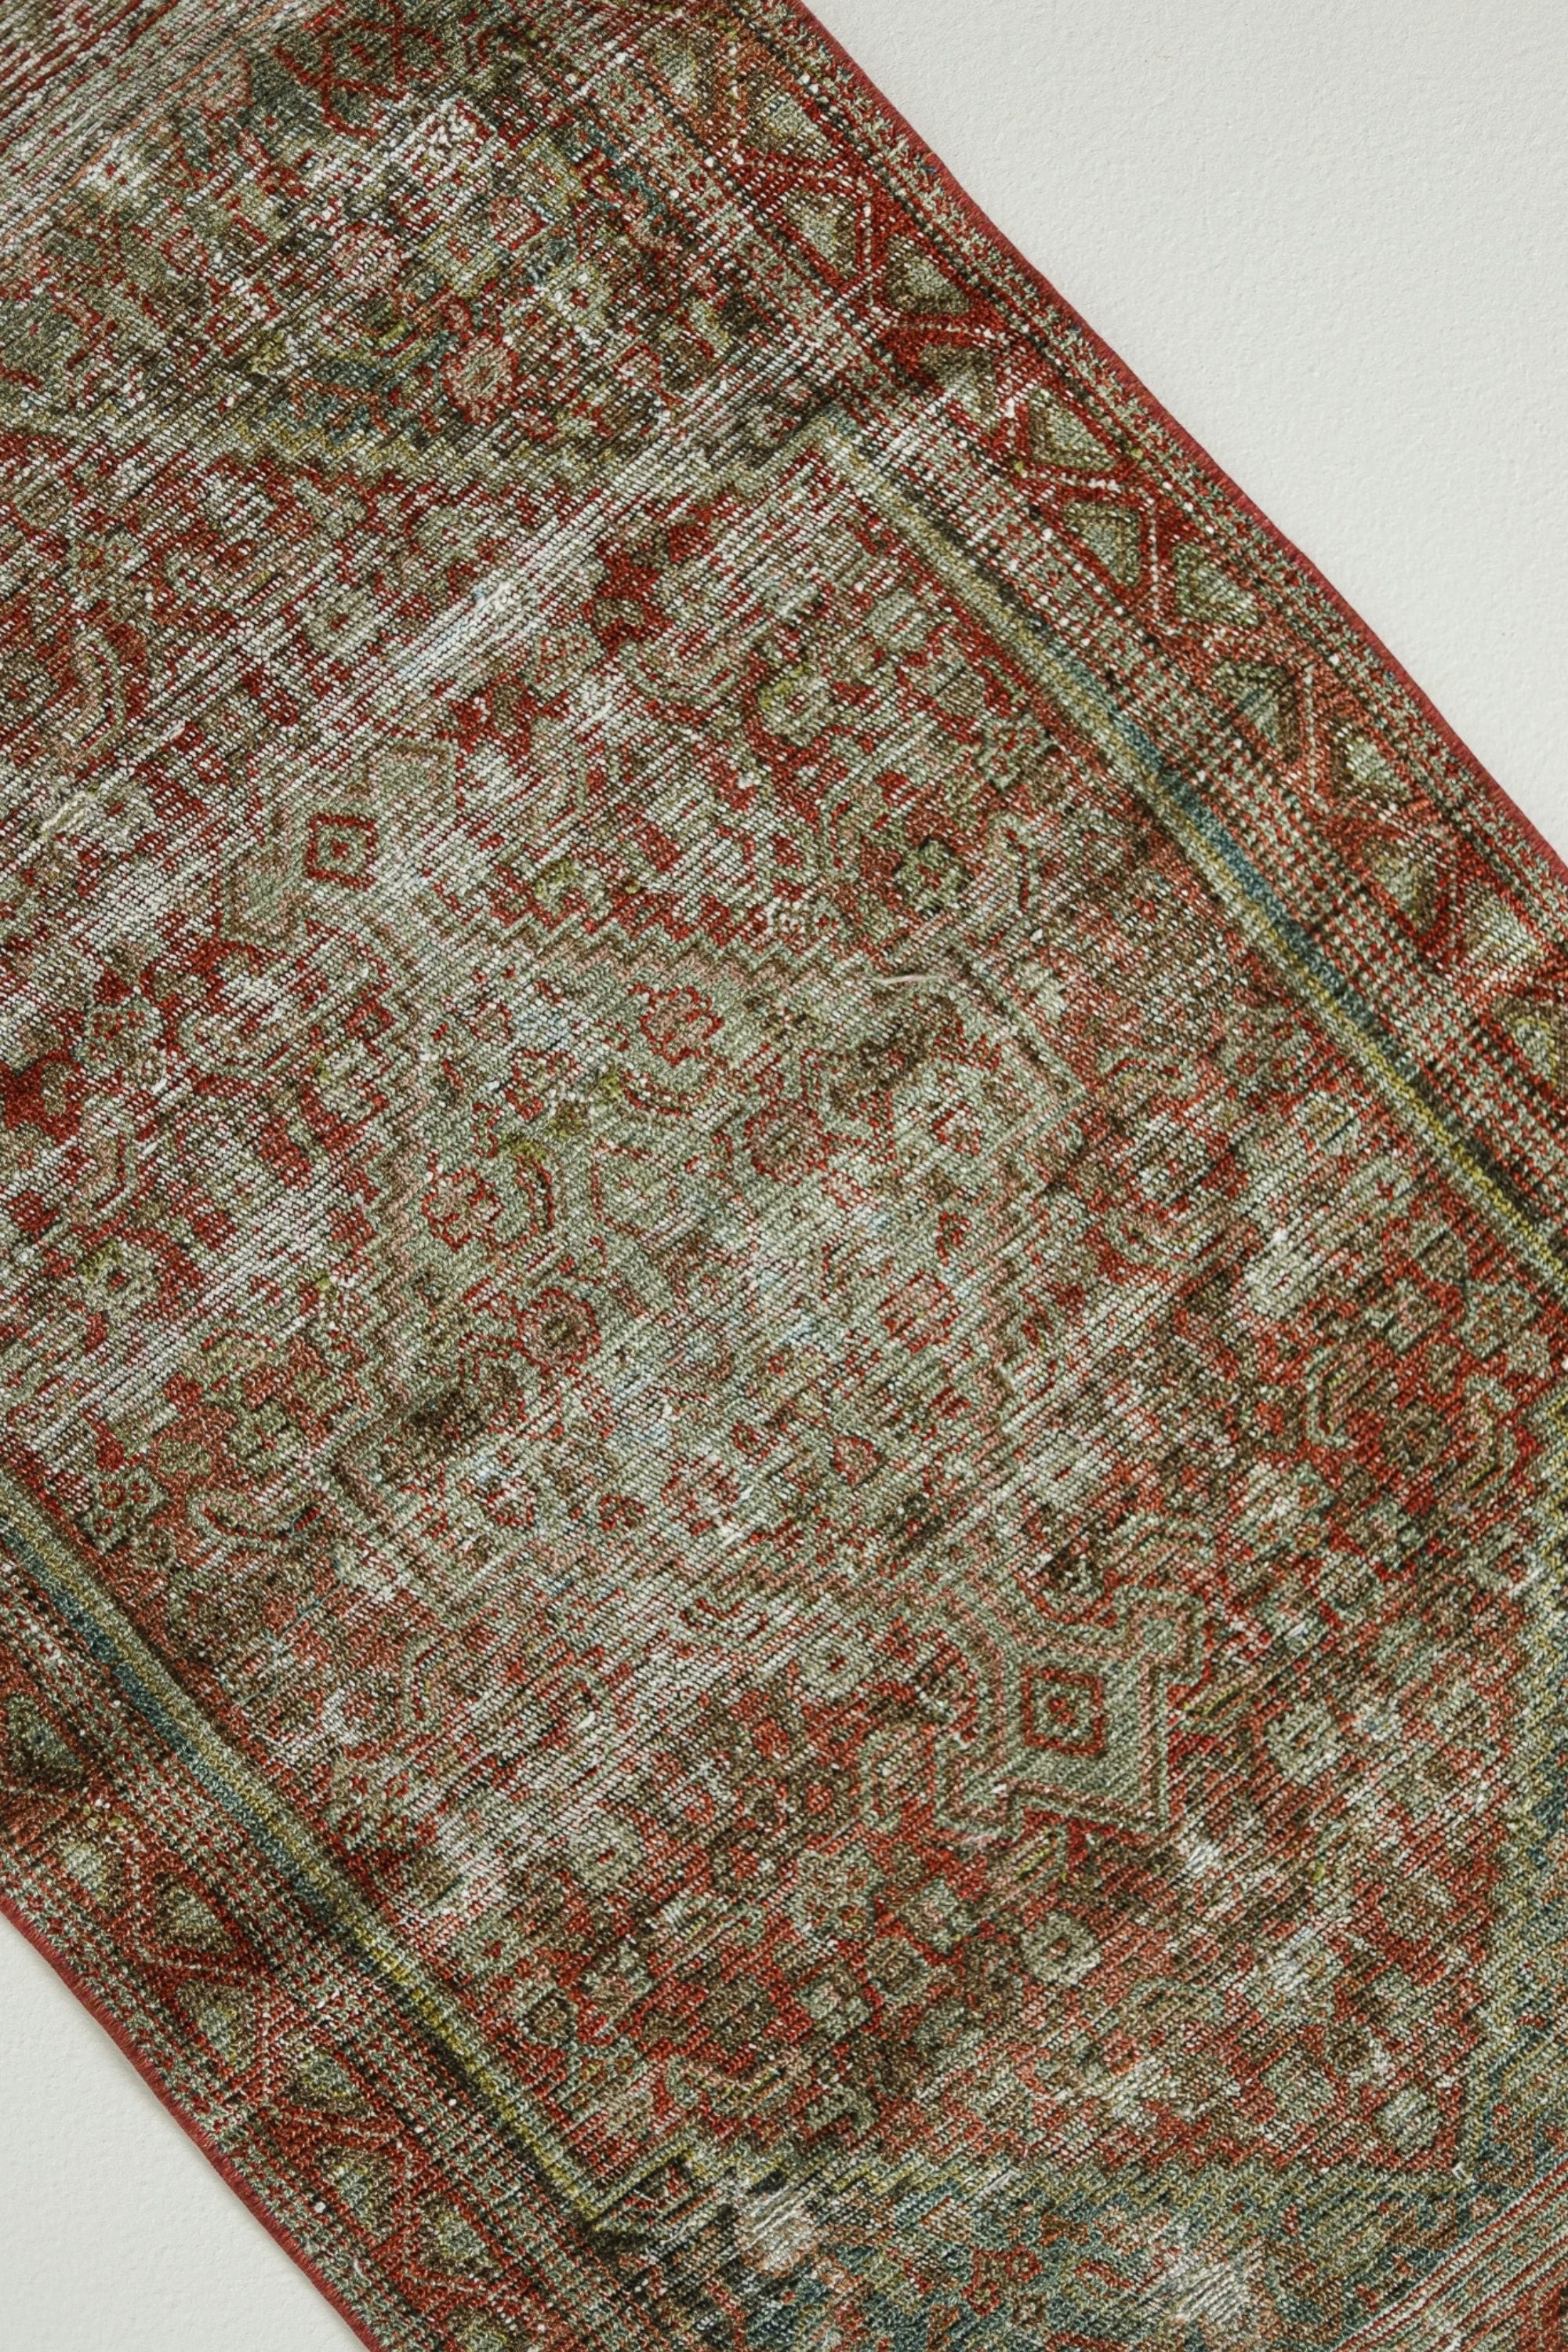 a red and green rug on a white floor